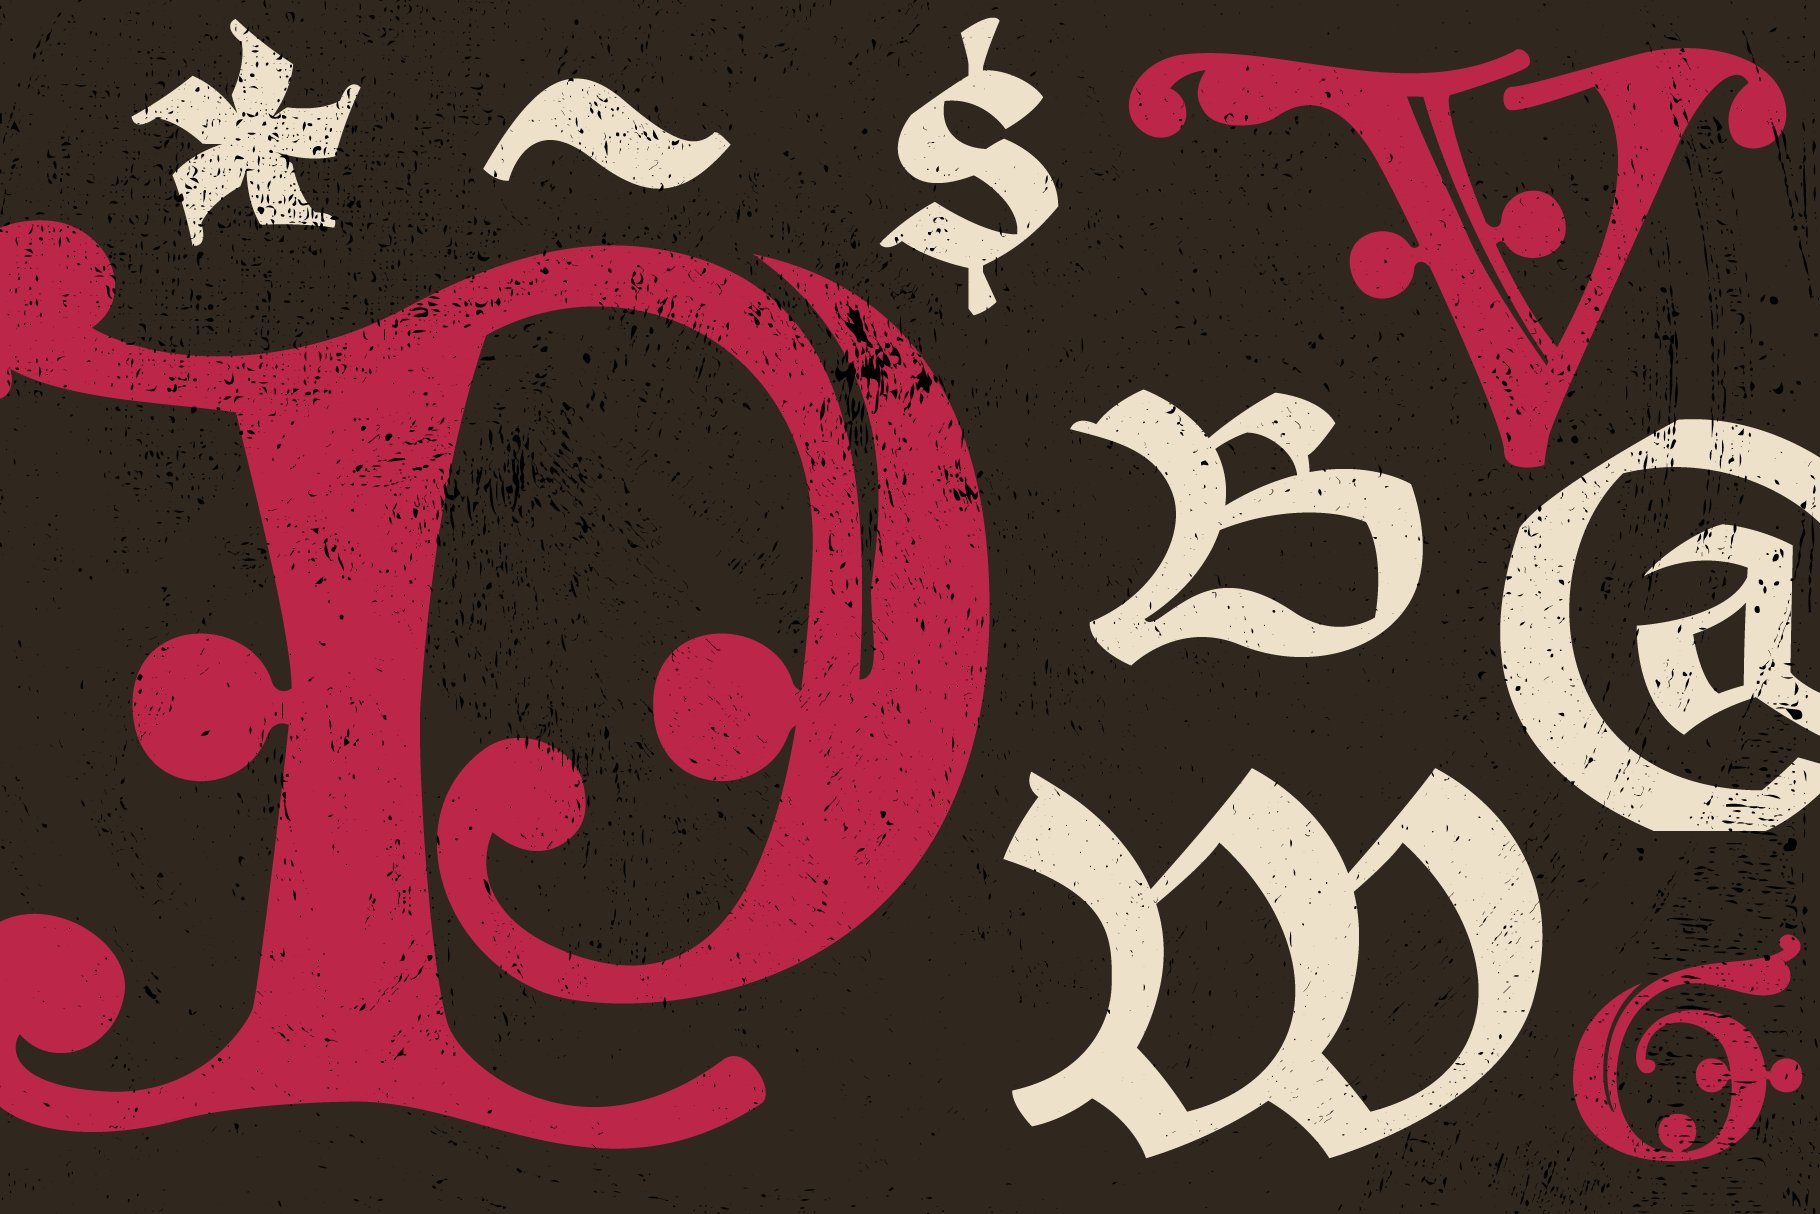 Lotter blackletter with Drop capspreview image.